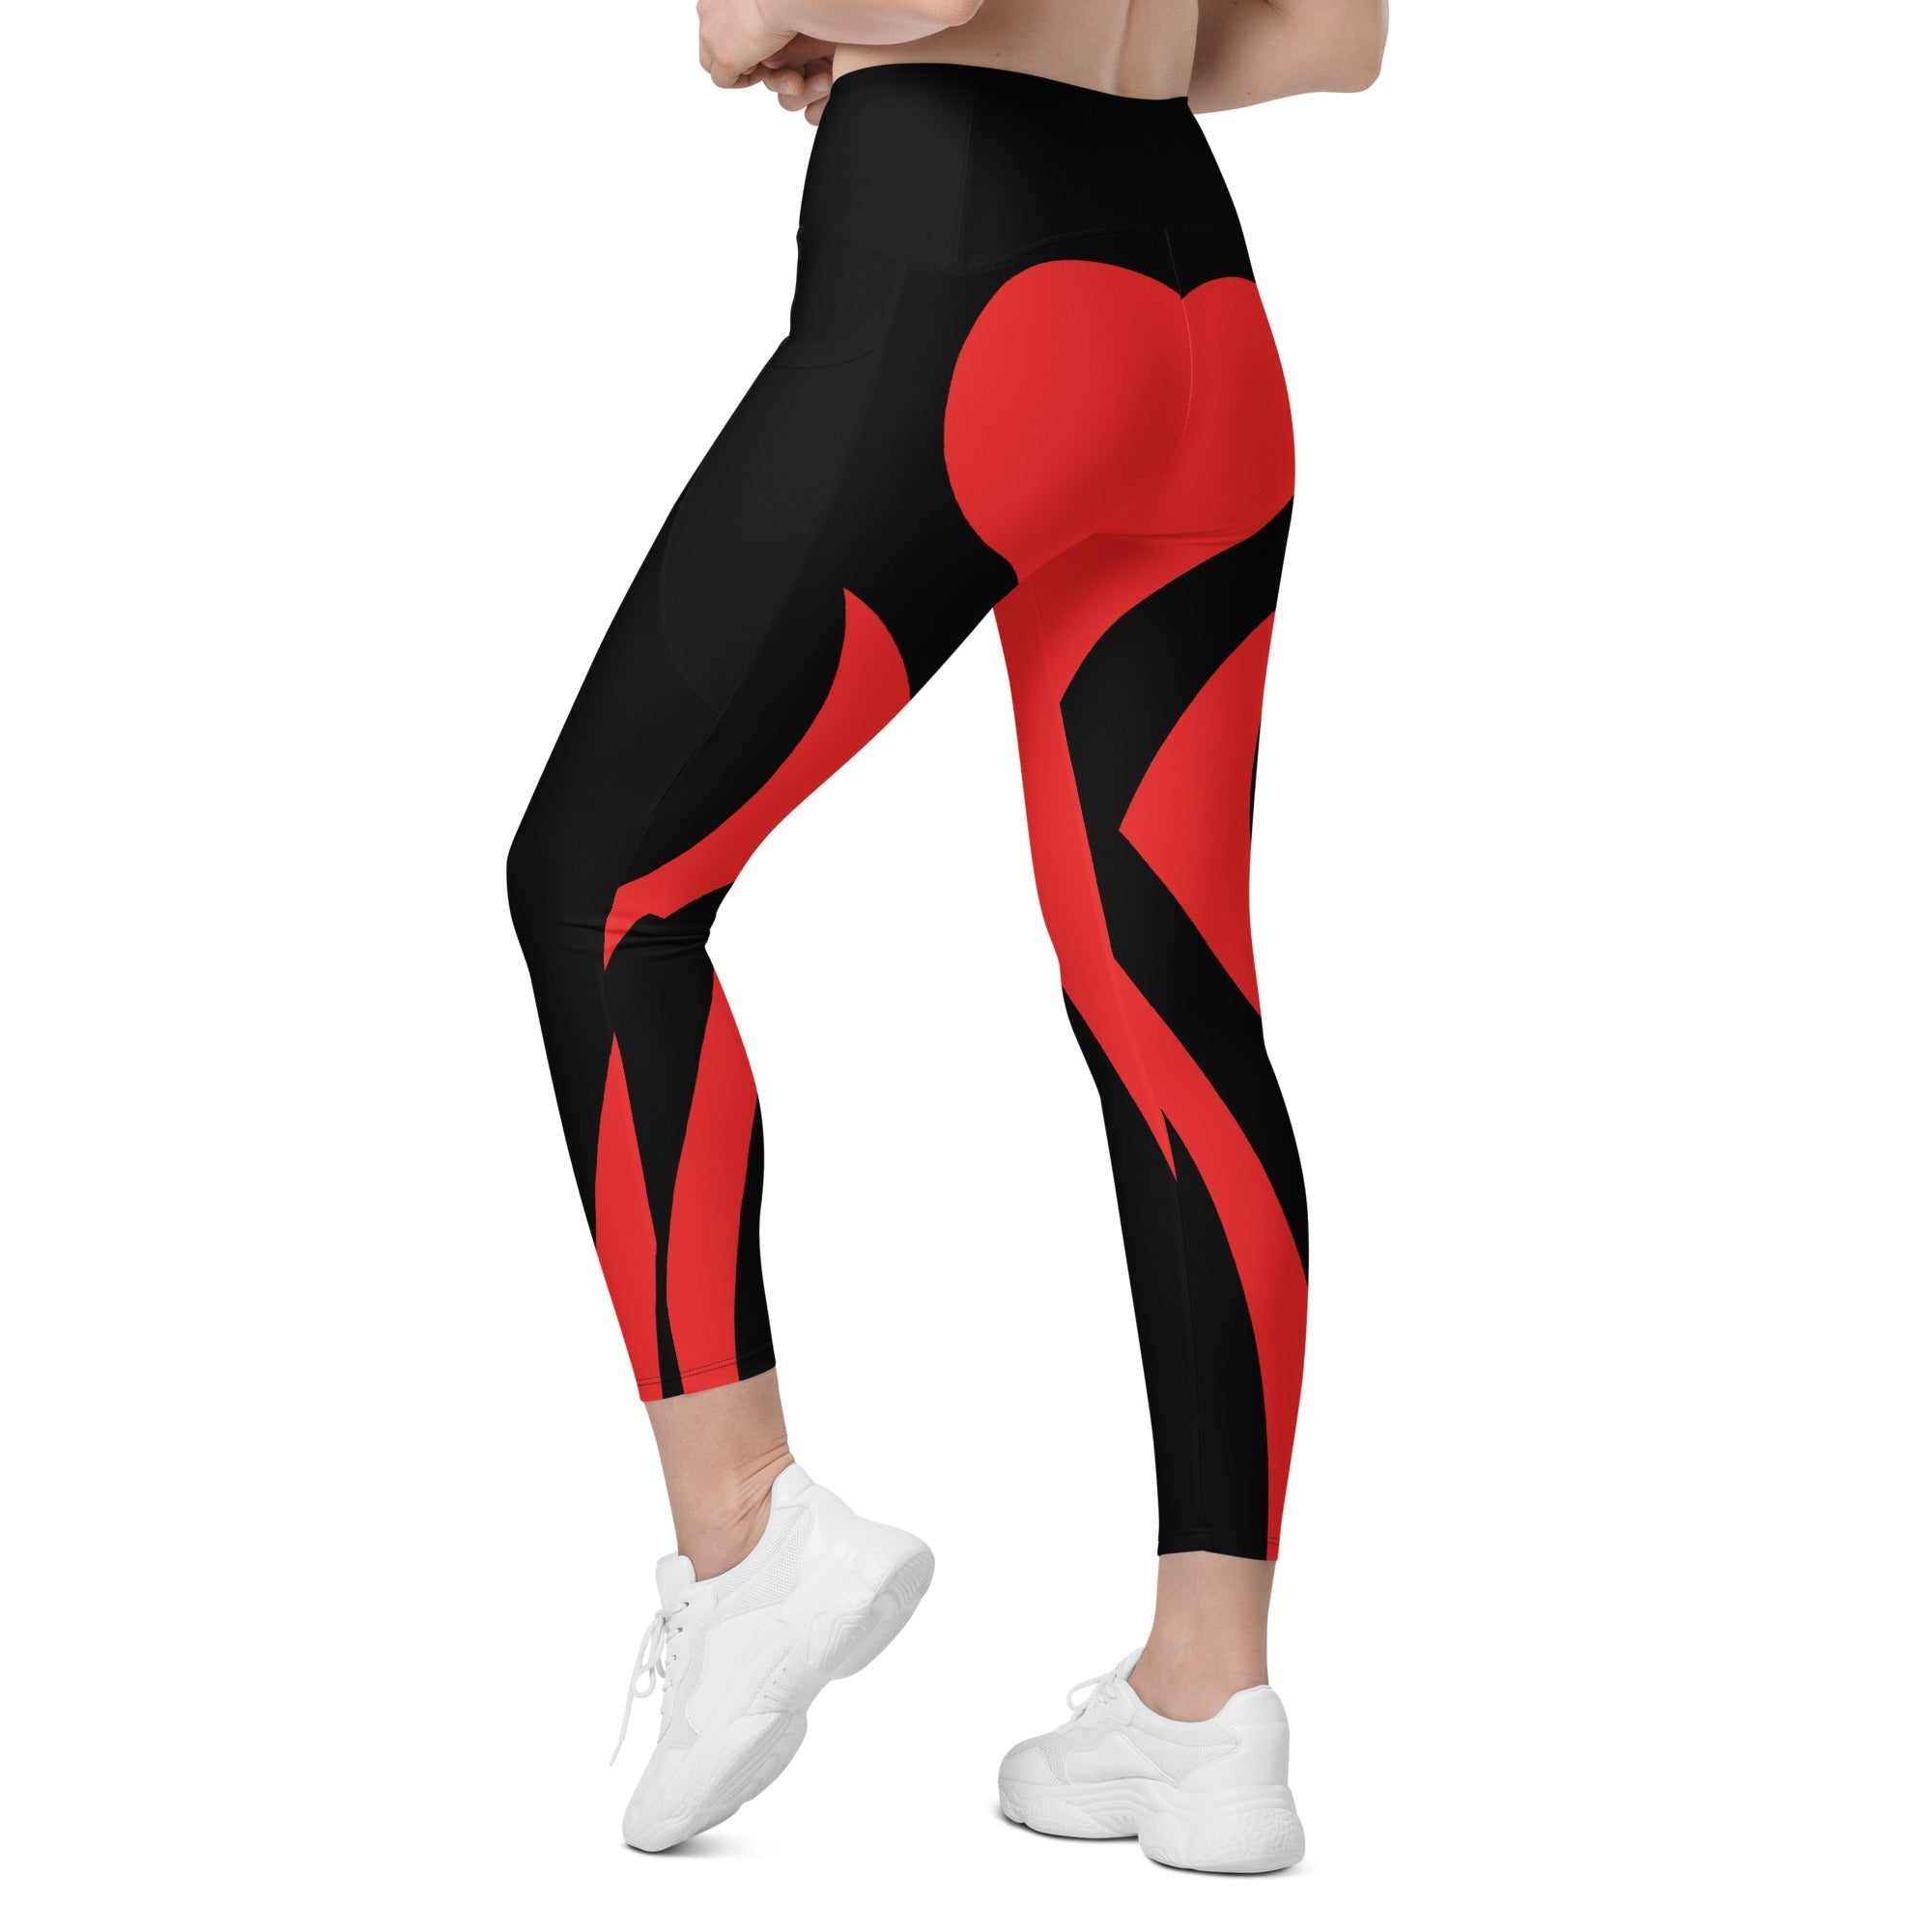 Black & Red Heart Shaped Leggings With Pockets